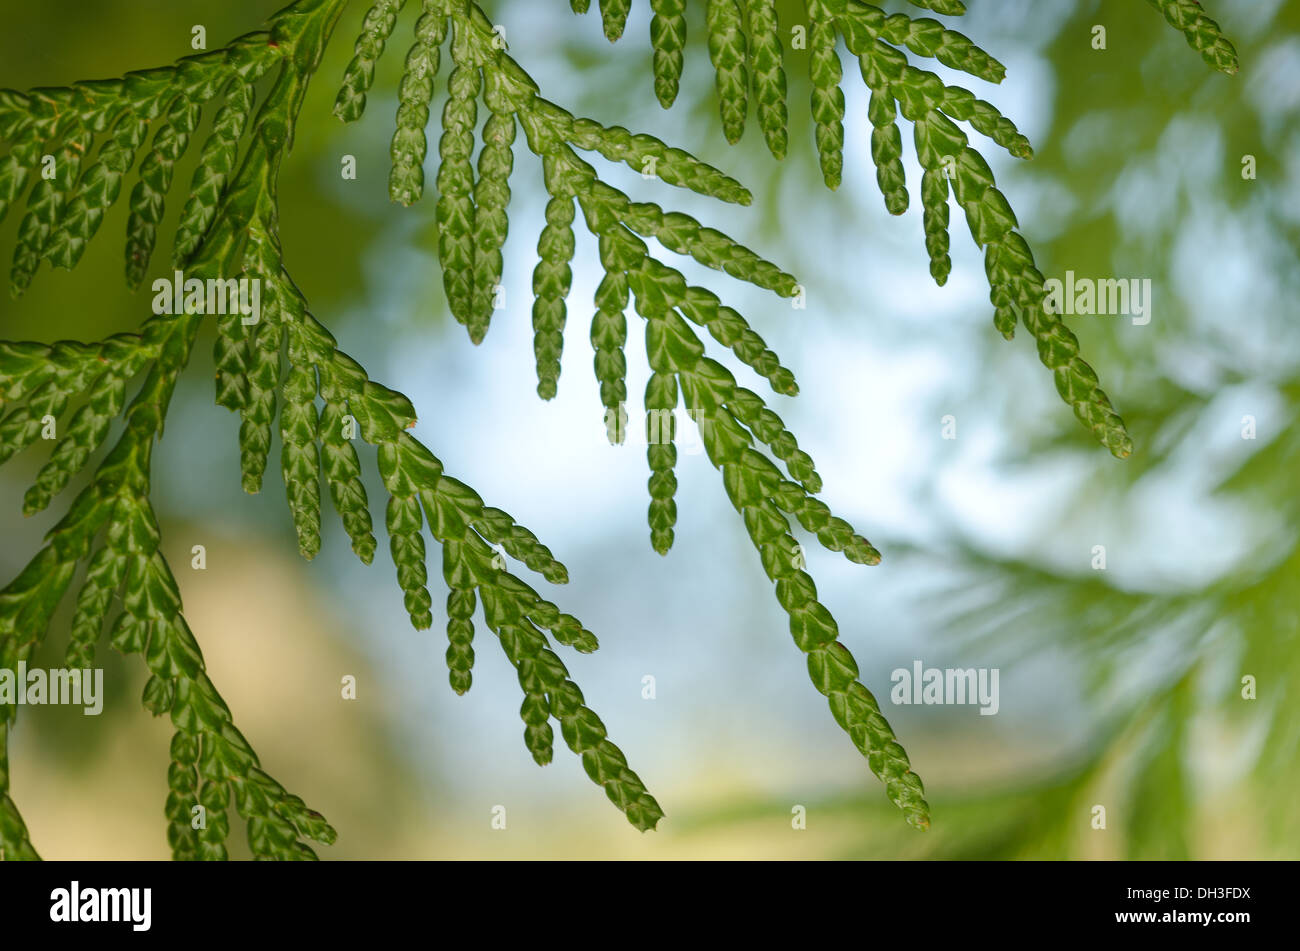 details of small delicate leaves of conifer cypress tree Stock Photo